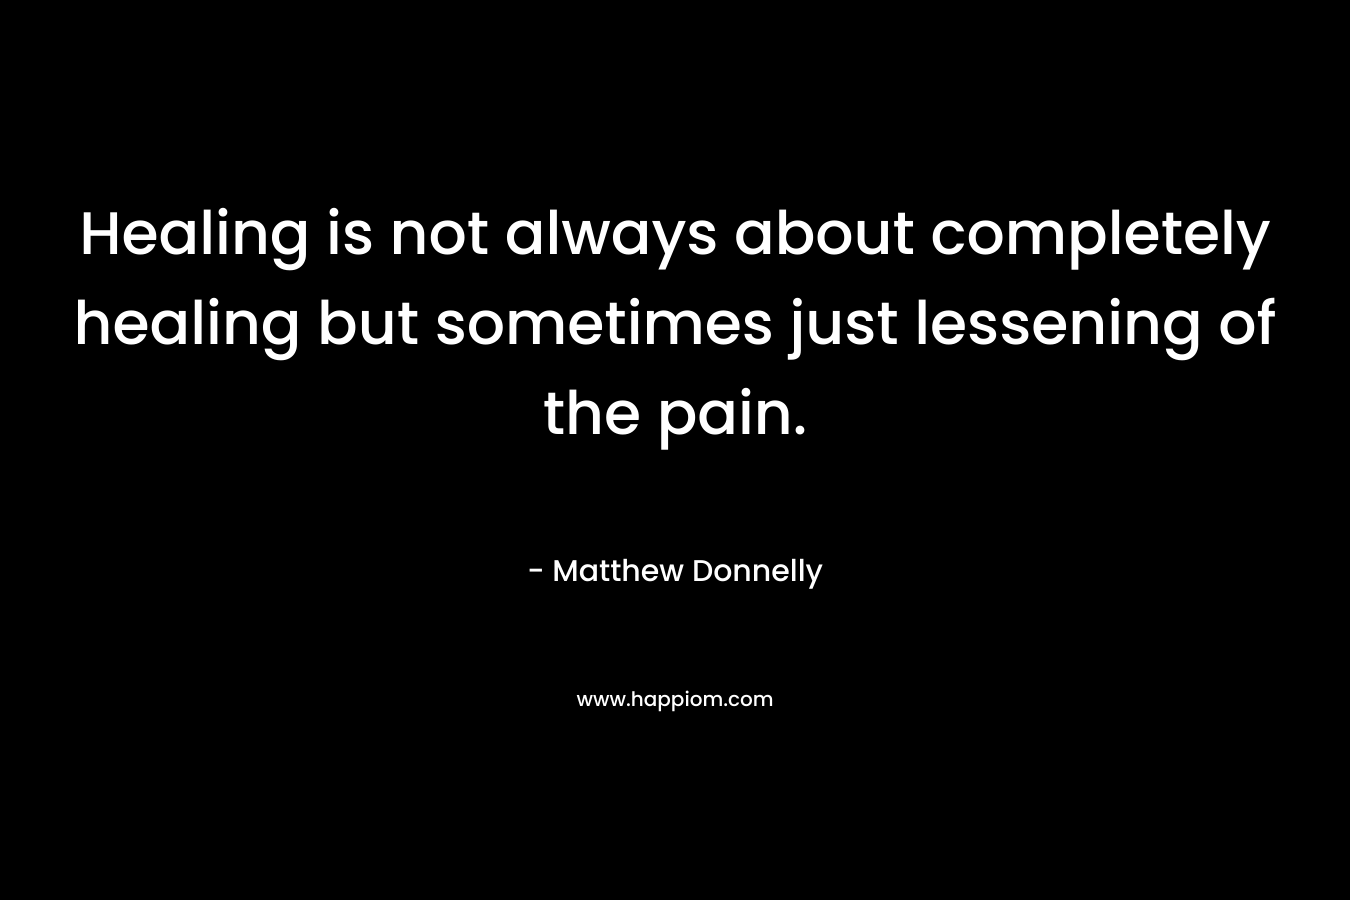 Healing is not always about completely healing but sometimes just lessening of the pain.